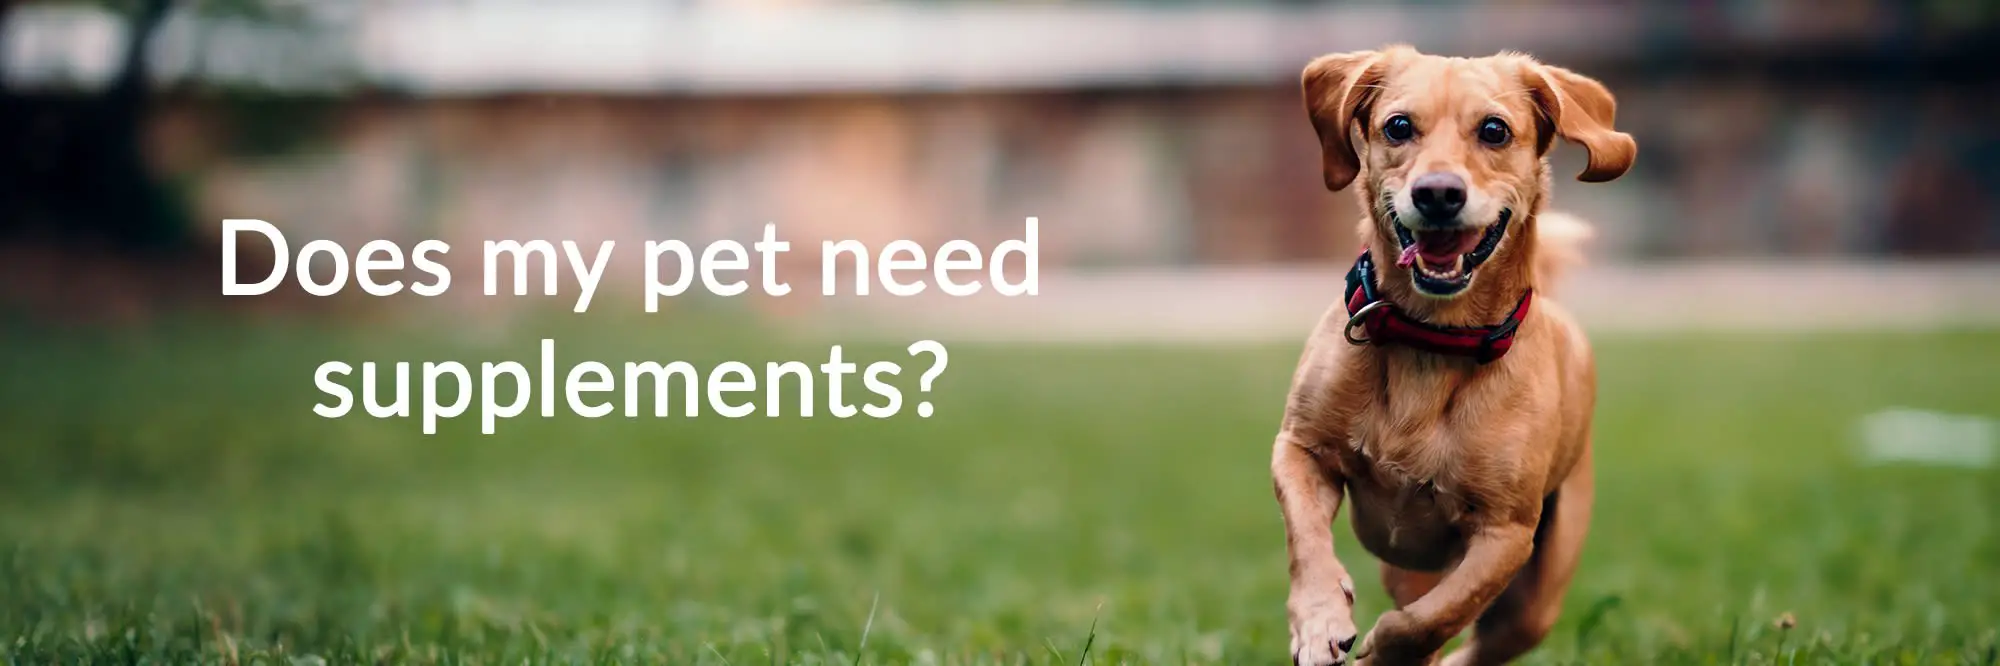 Does my pet need supplements?